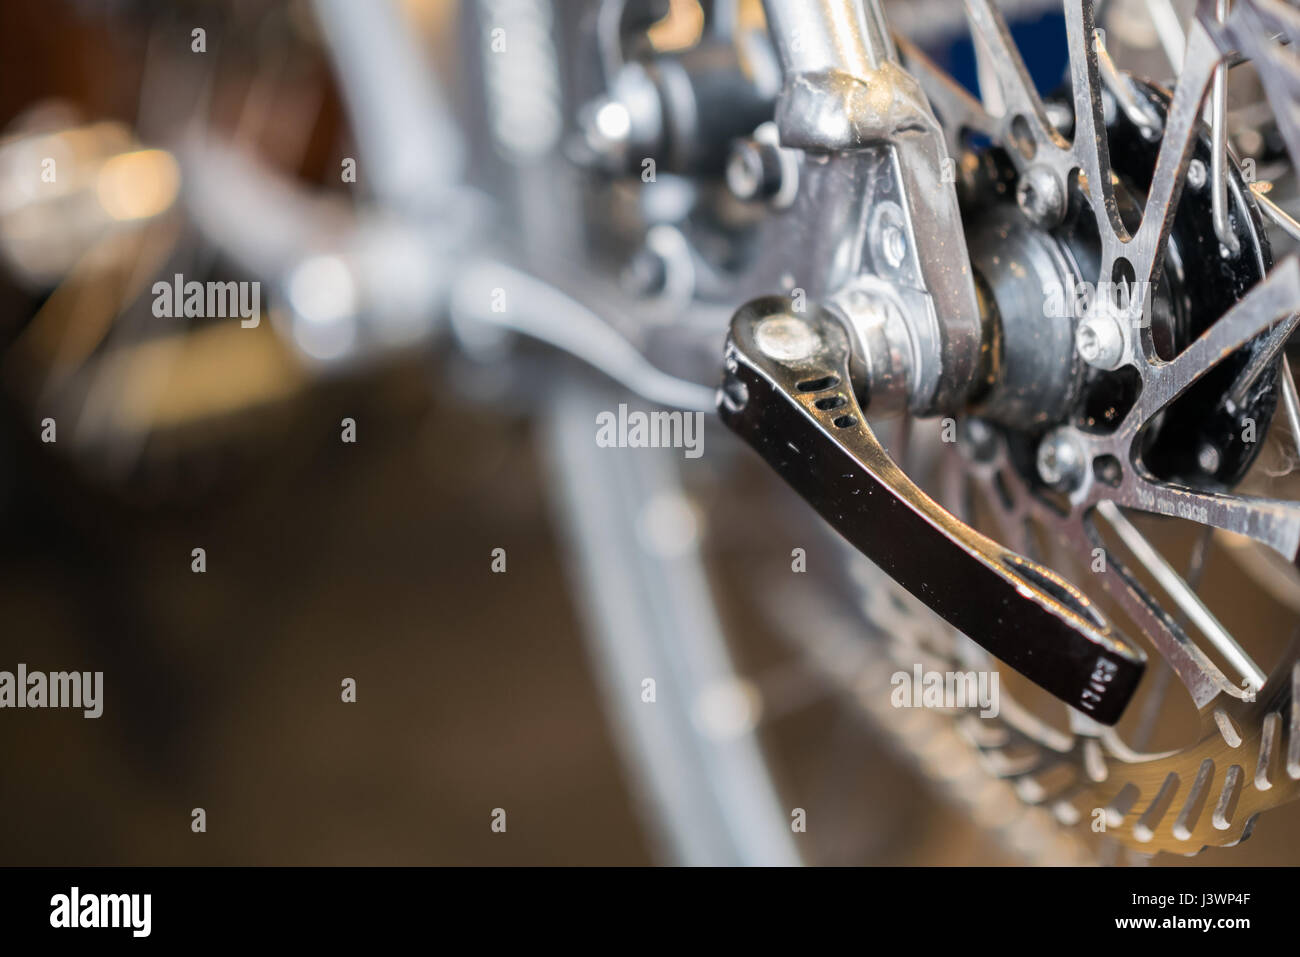 Photo of bicycle carriage close-up Stock Photo